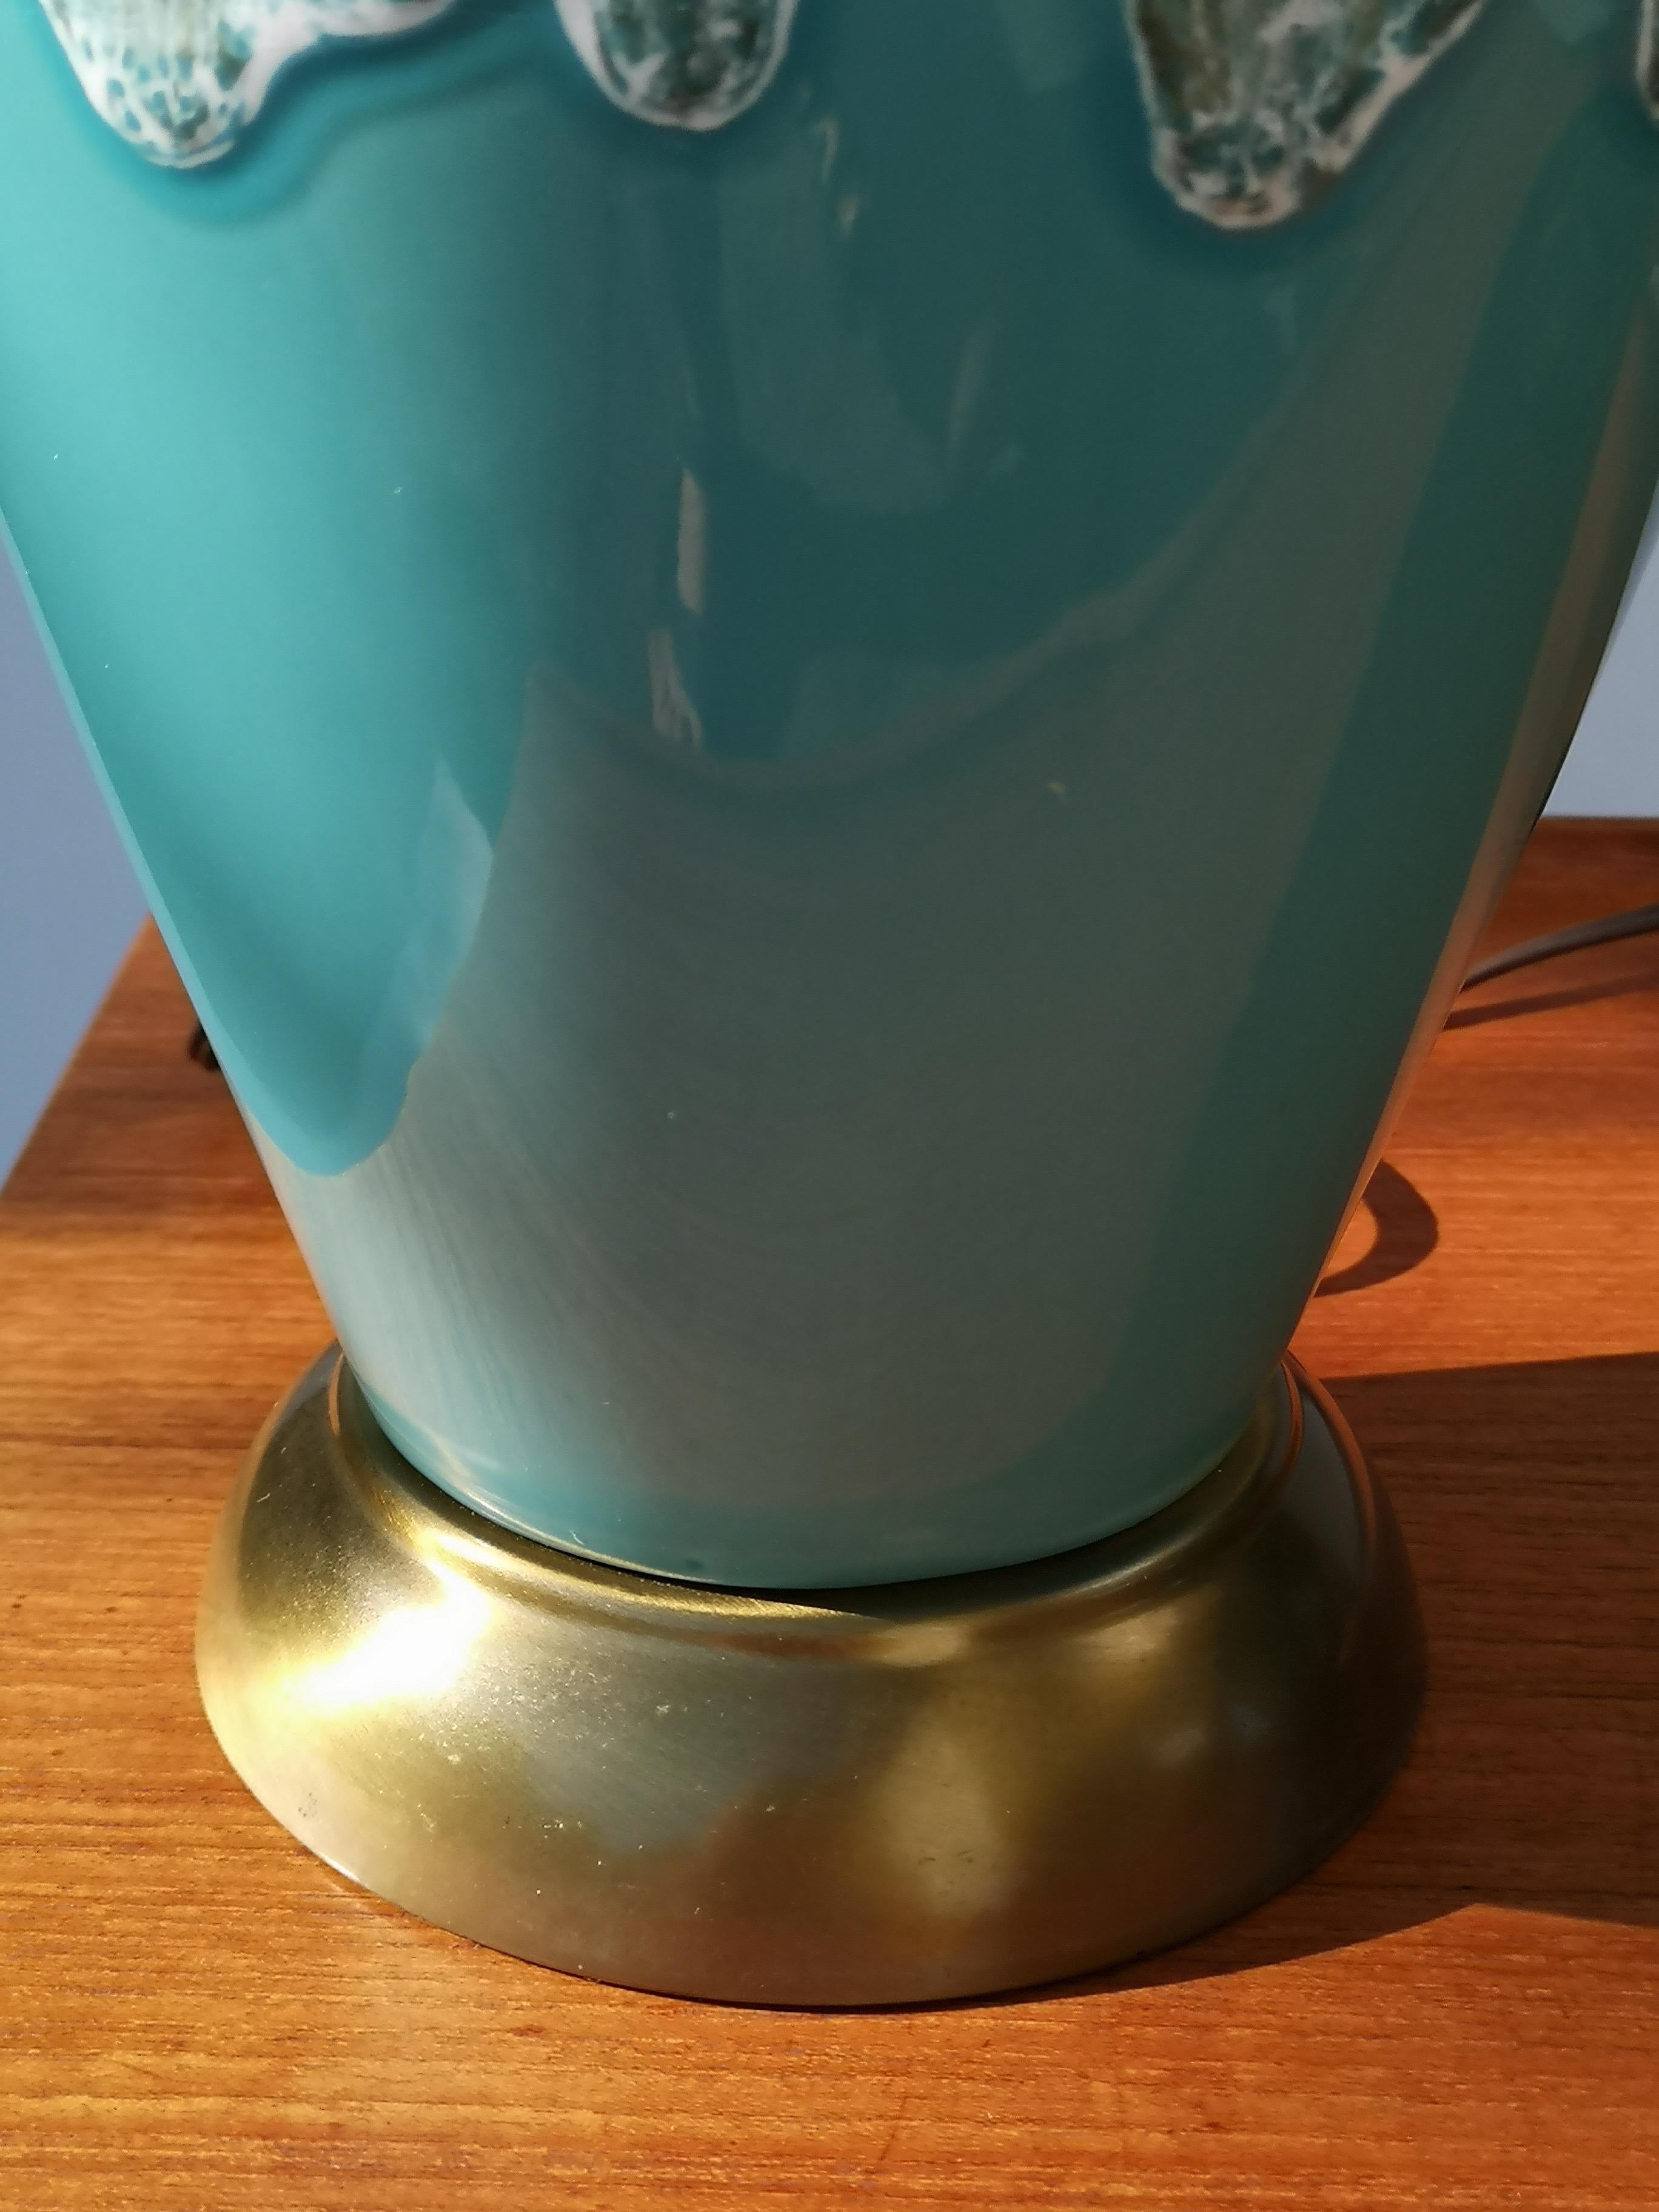 1960s Pair of Walnut and Turquoise Ceramic Drip Glaze Table Lamps For Sale 2